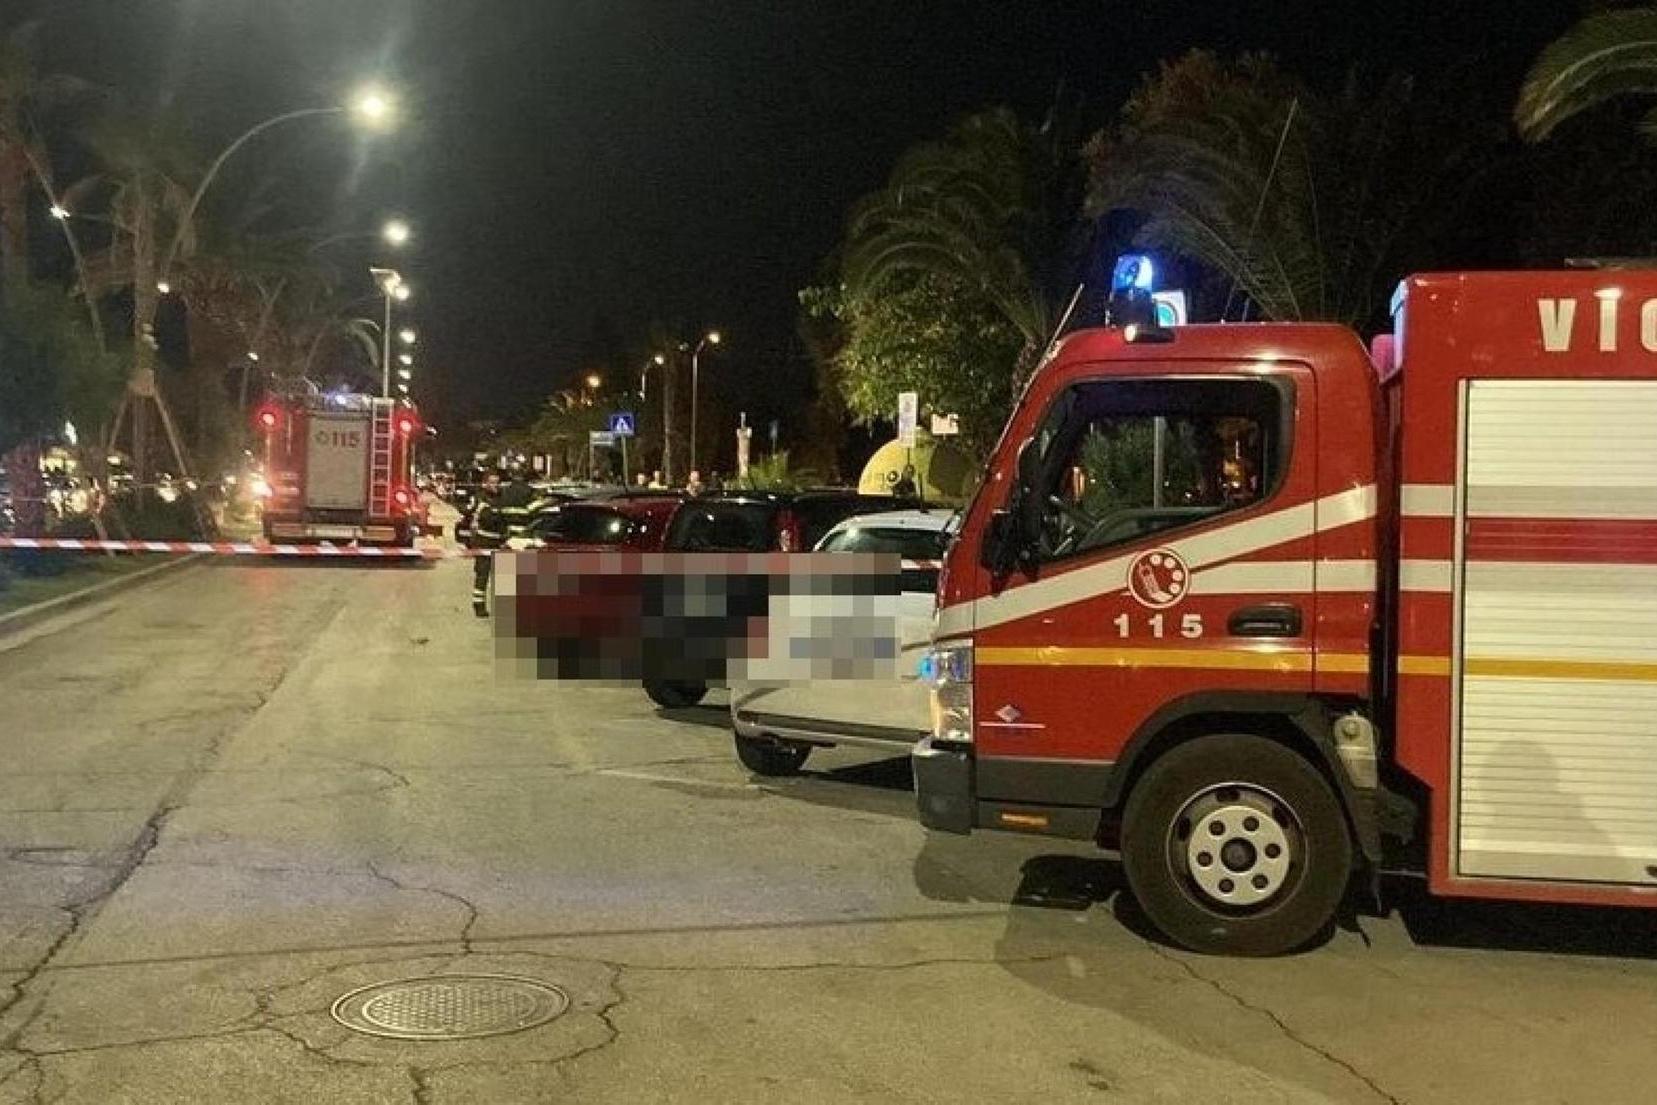 More violence in Civitanova Marche: stabbed and killed on the seafront